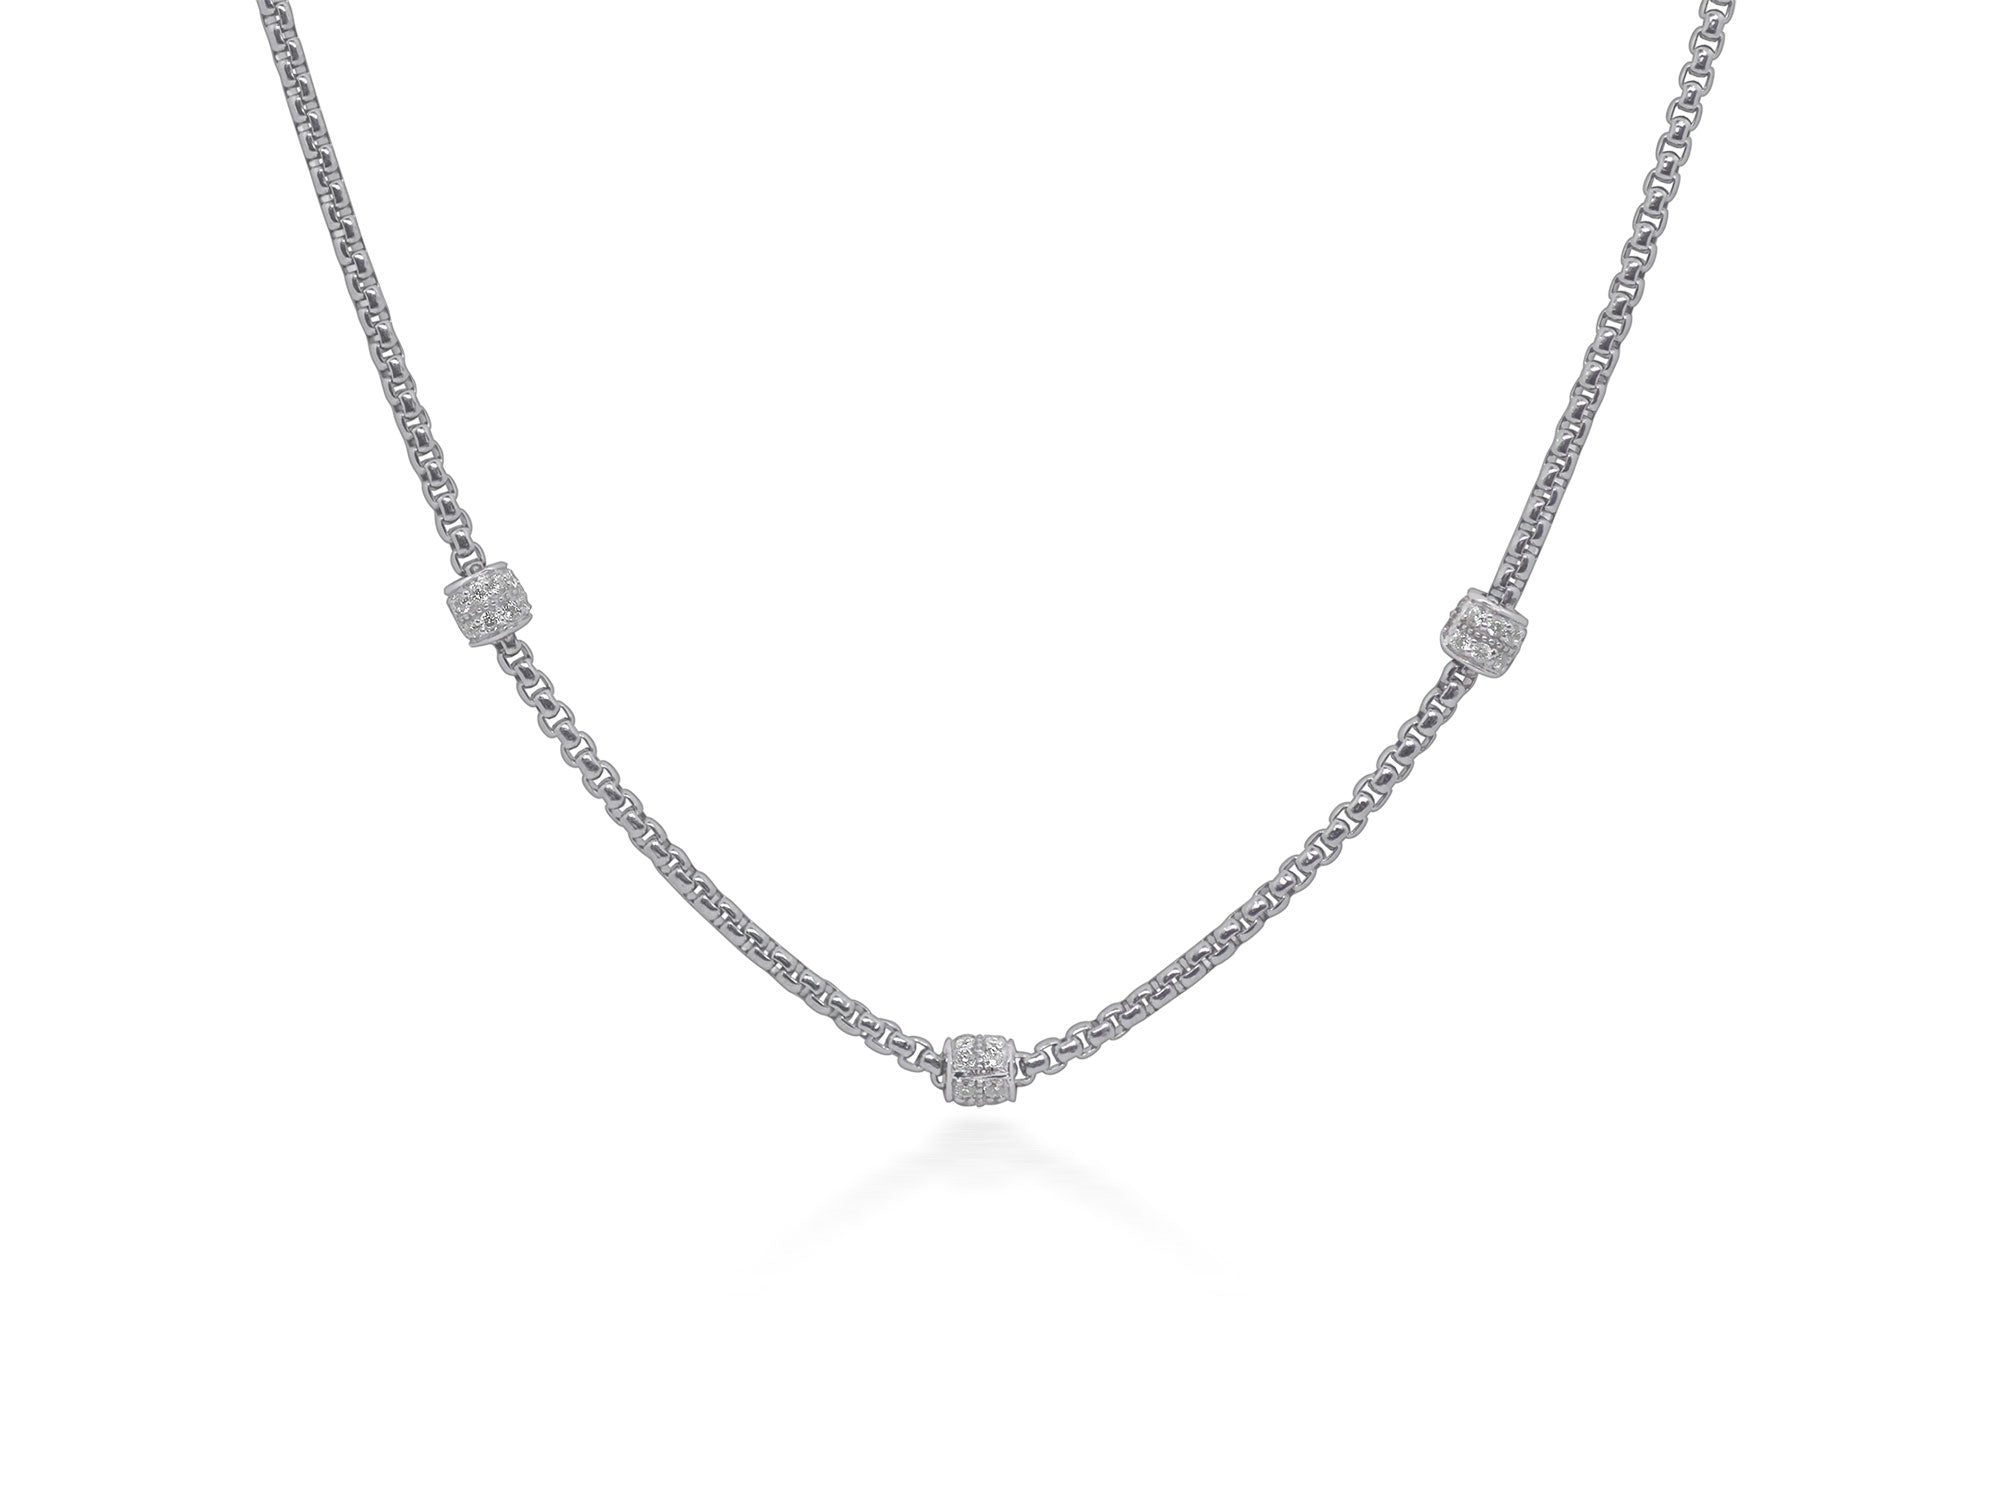 ALOR Grey Chain Expressions Barrel Station Necklace with 14kt White Gold & Diamonds